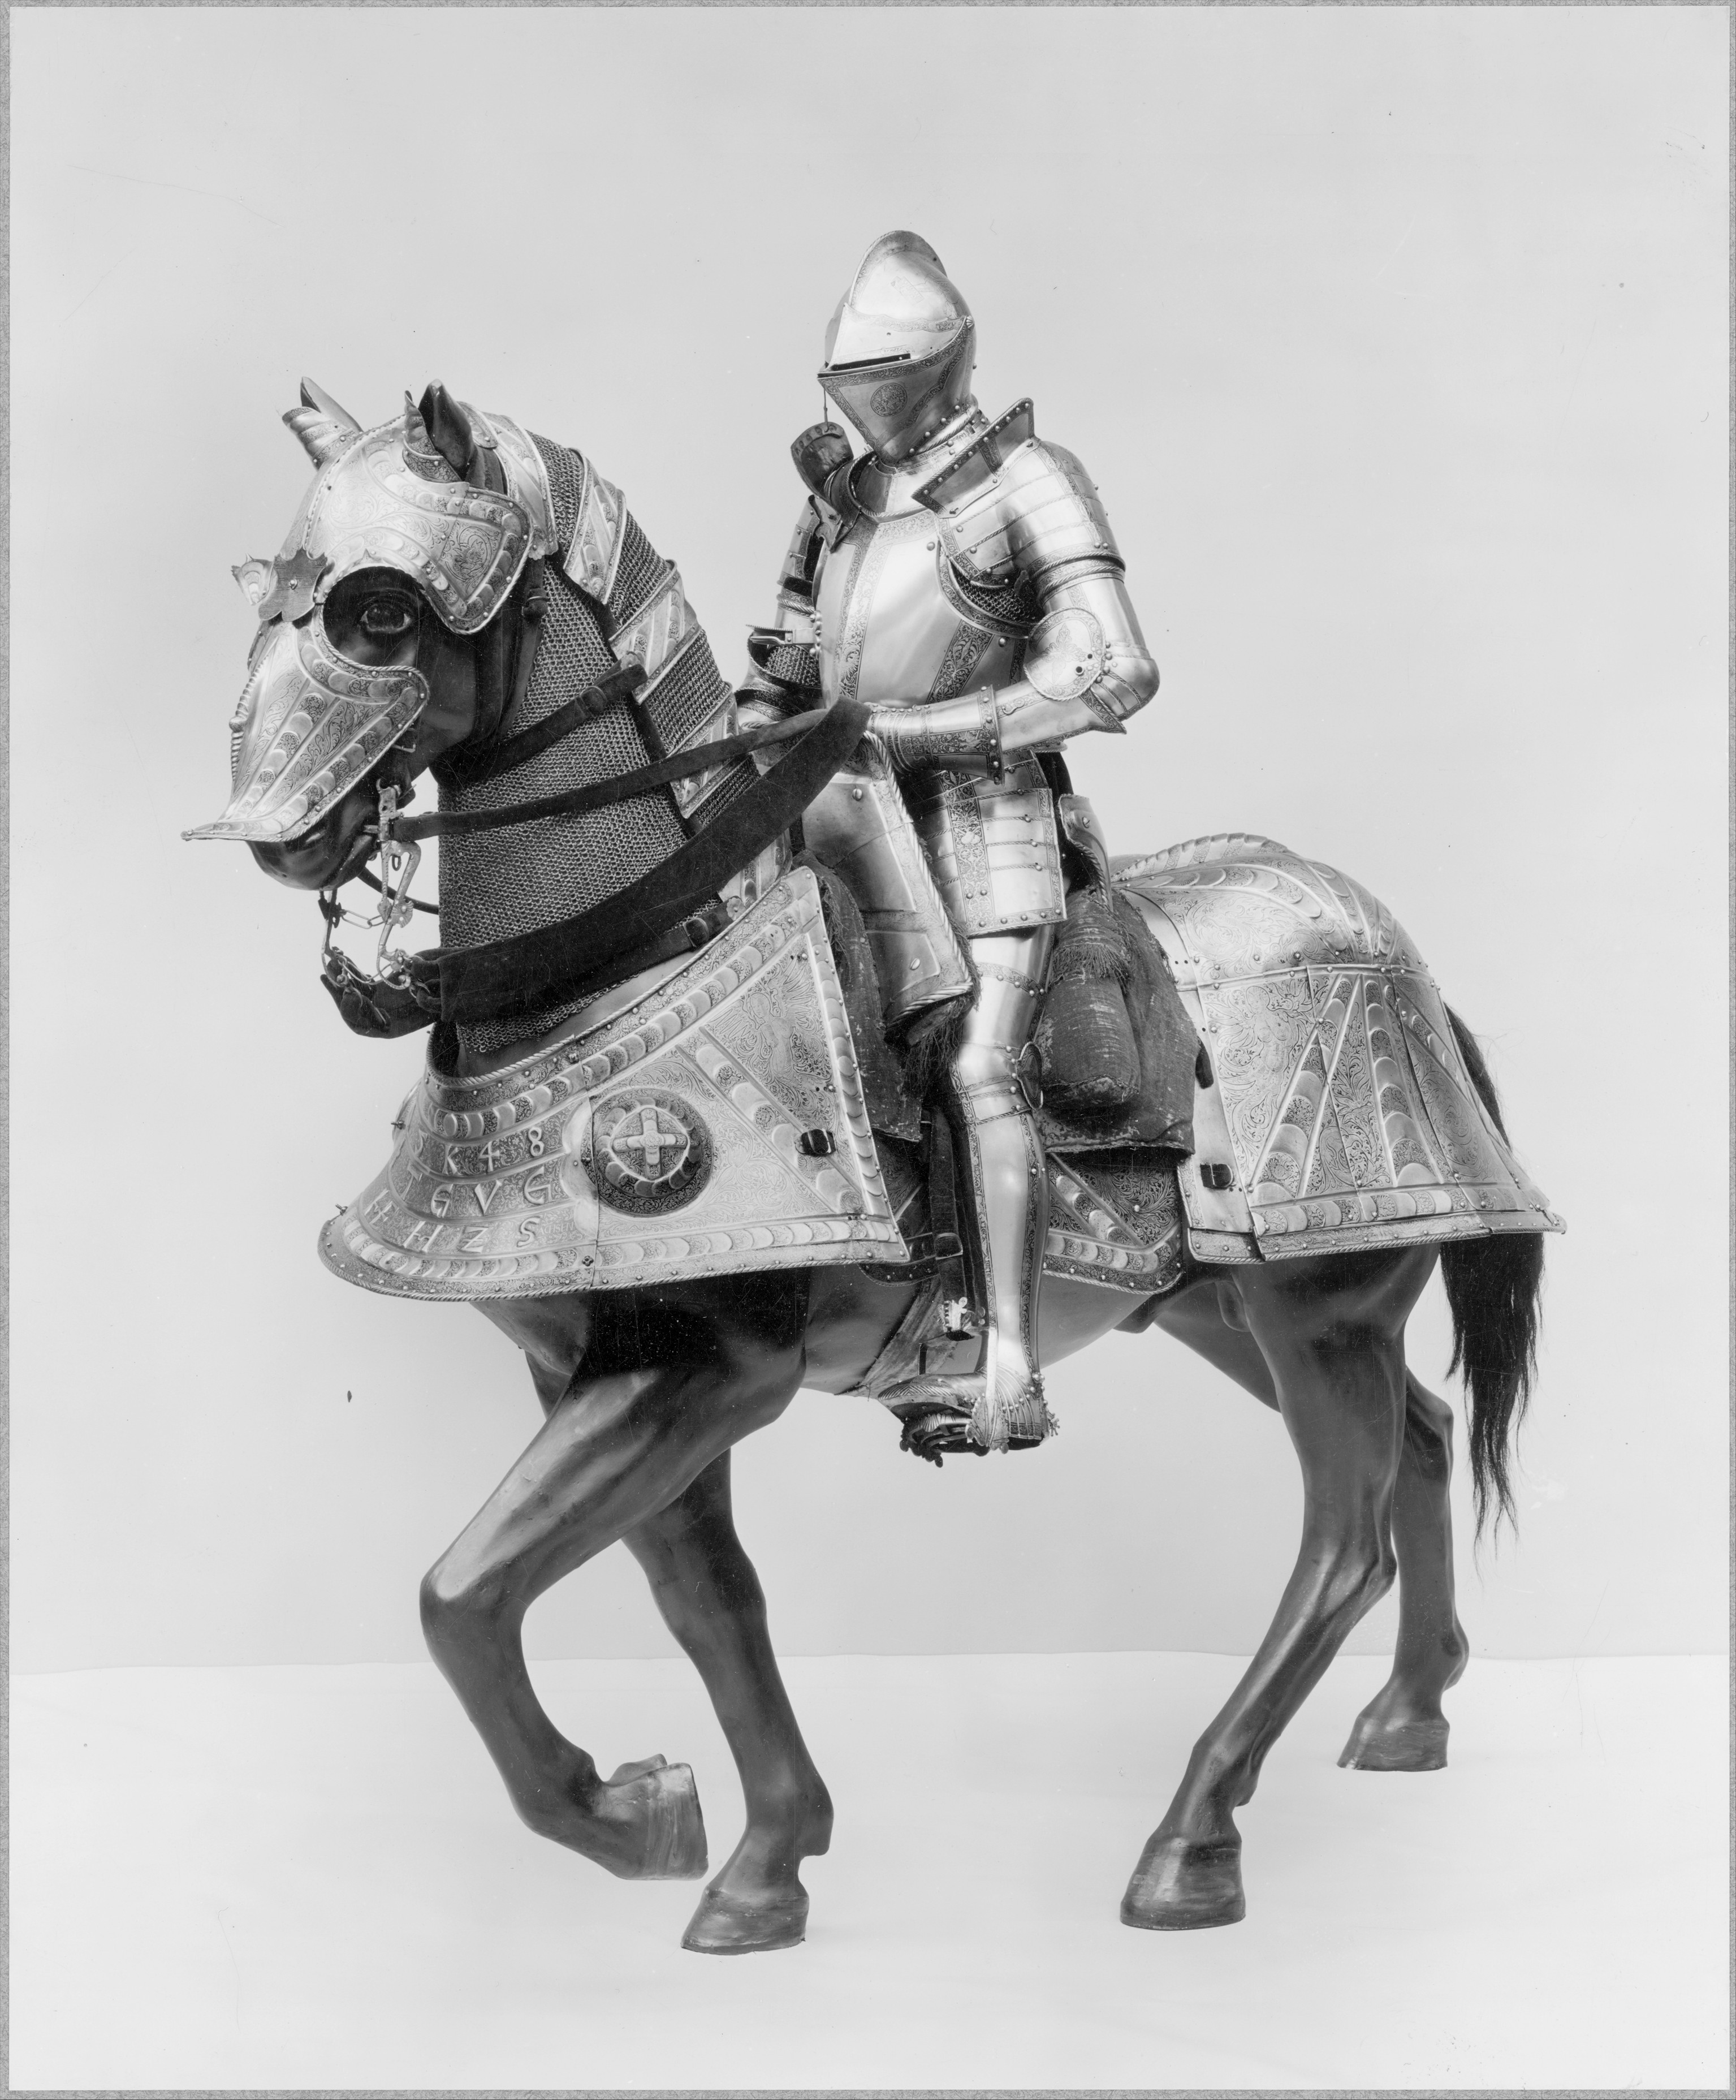 Arms and Armor—Common Misconceptions and Frequently Asked Questions, Essay, The Metropolitan Museum of Art